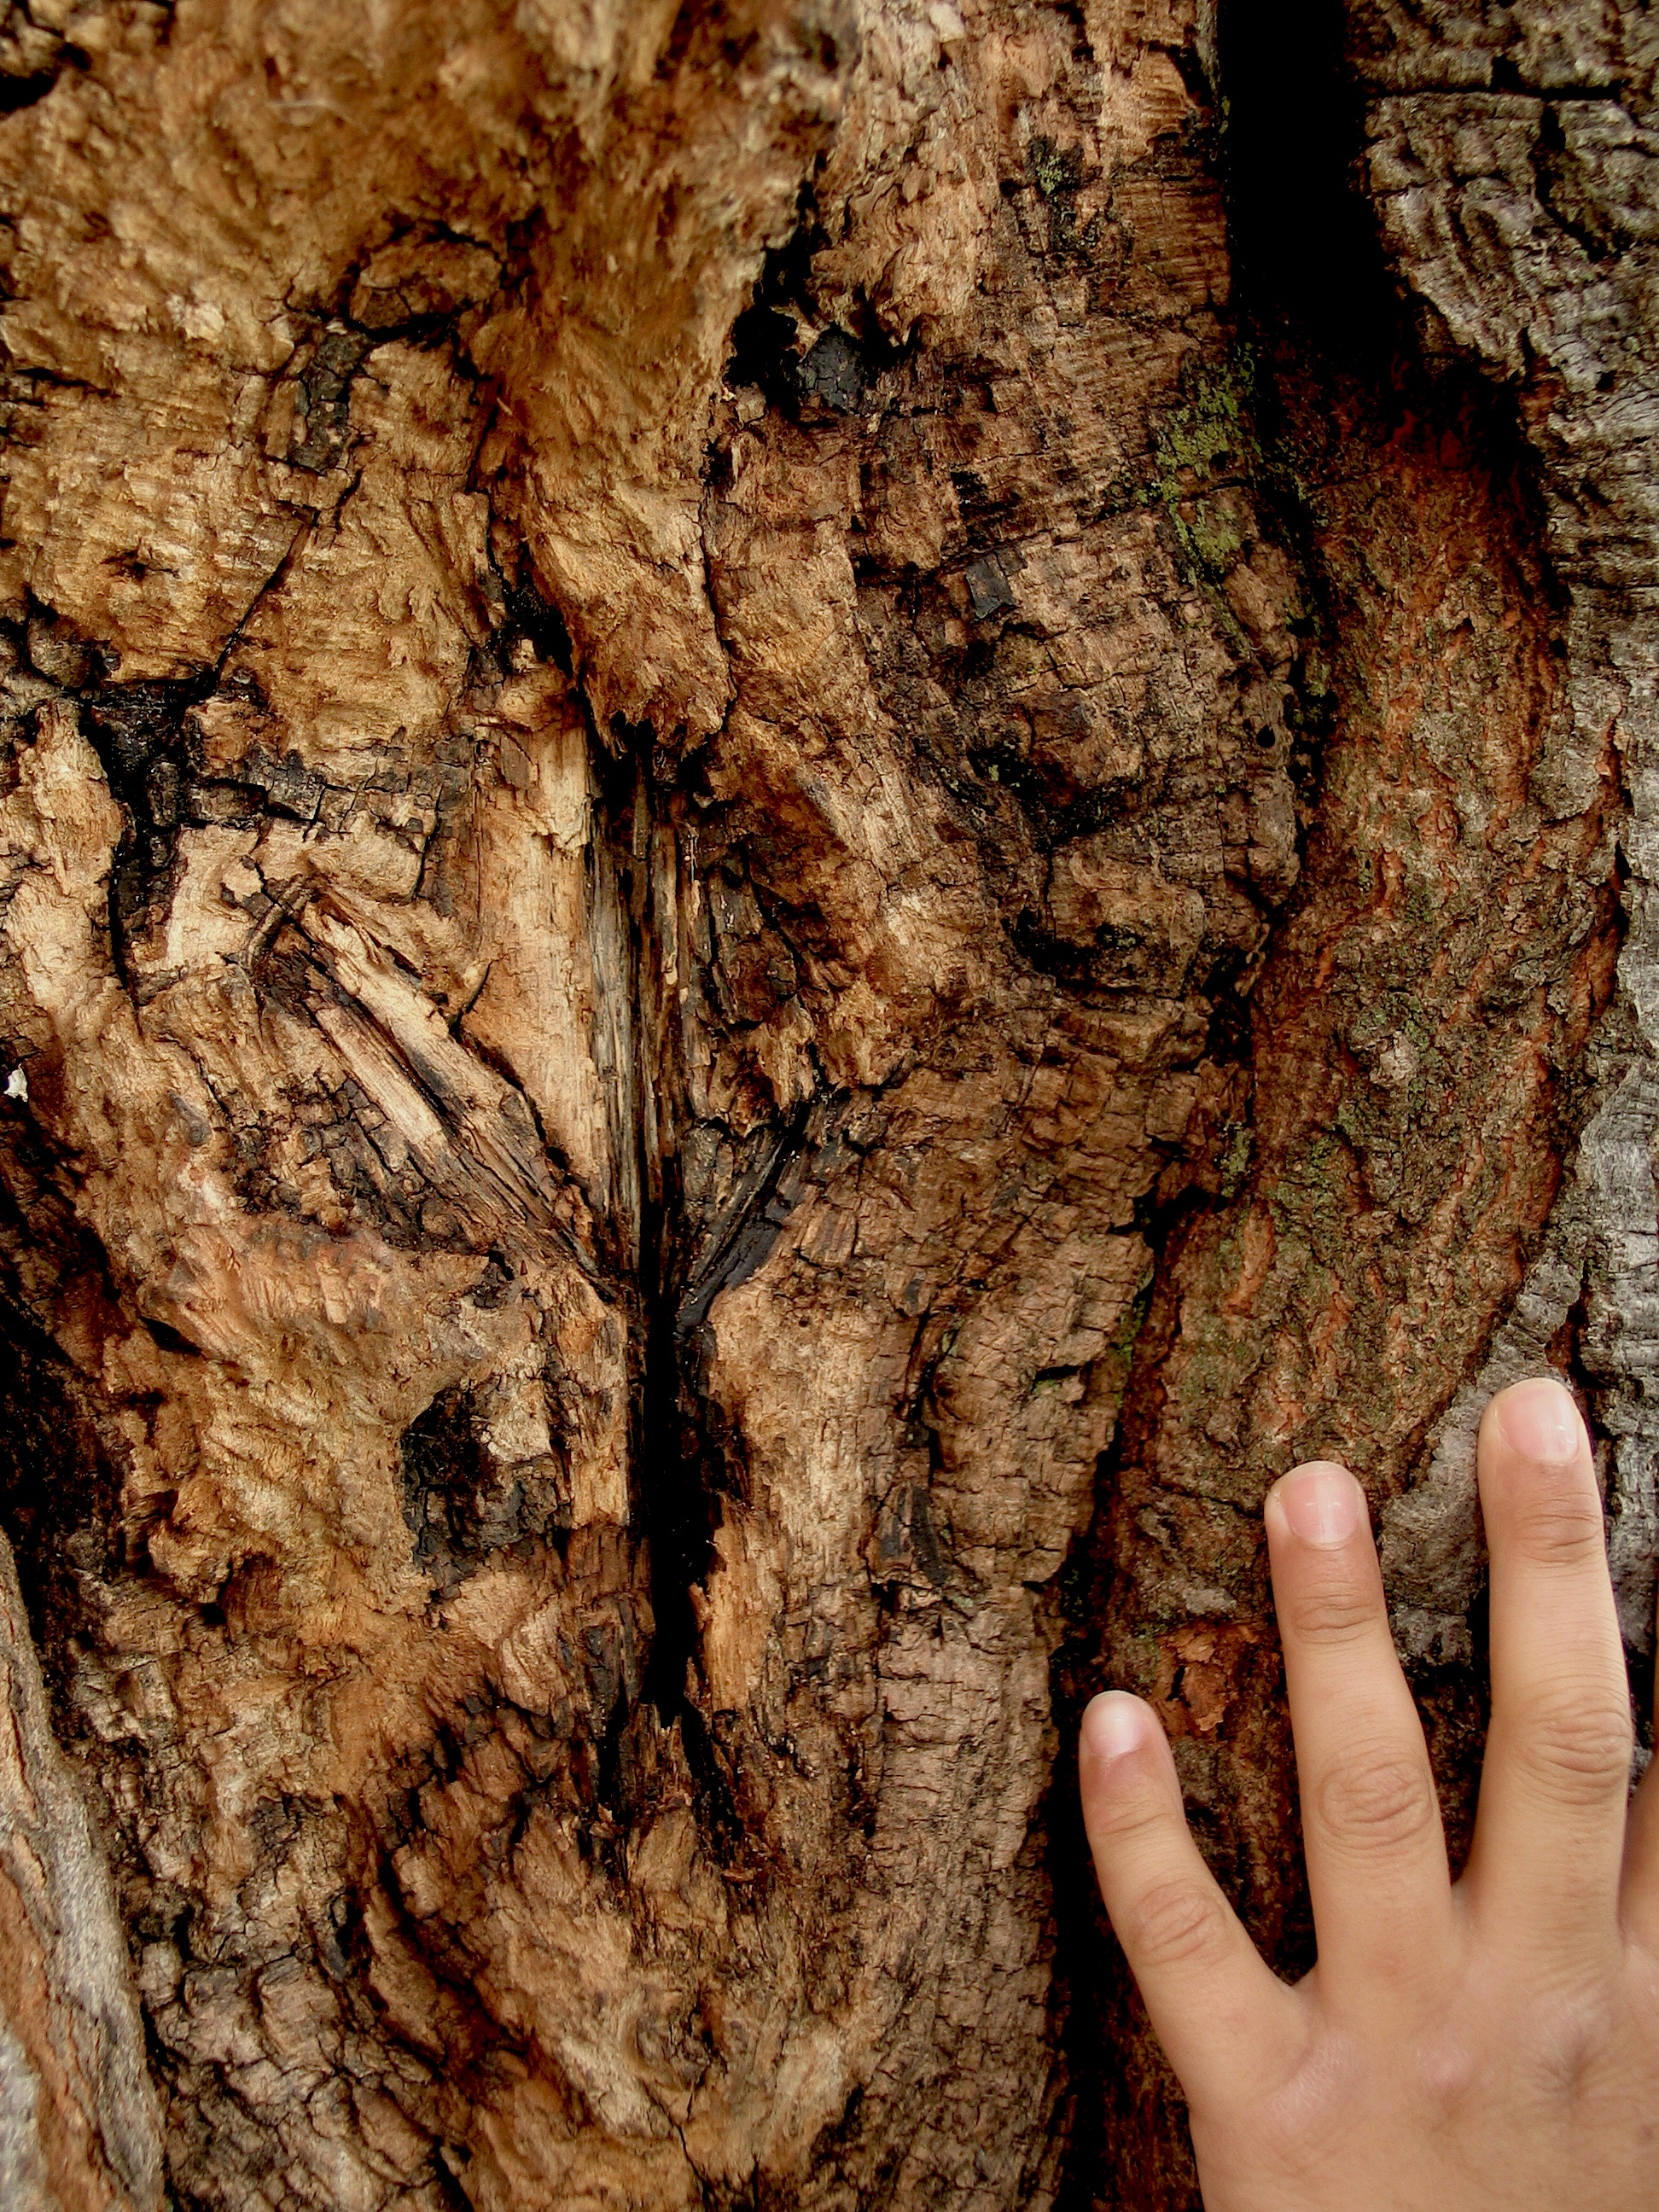 A young hand on the bark of a tree